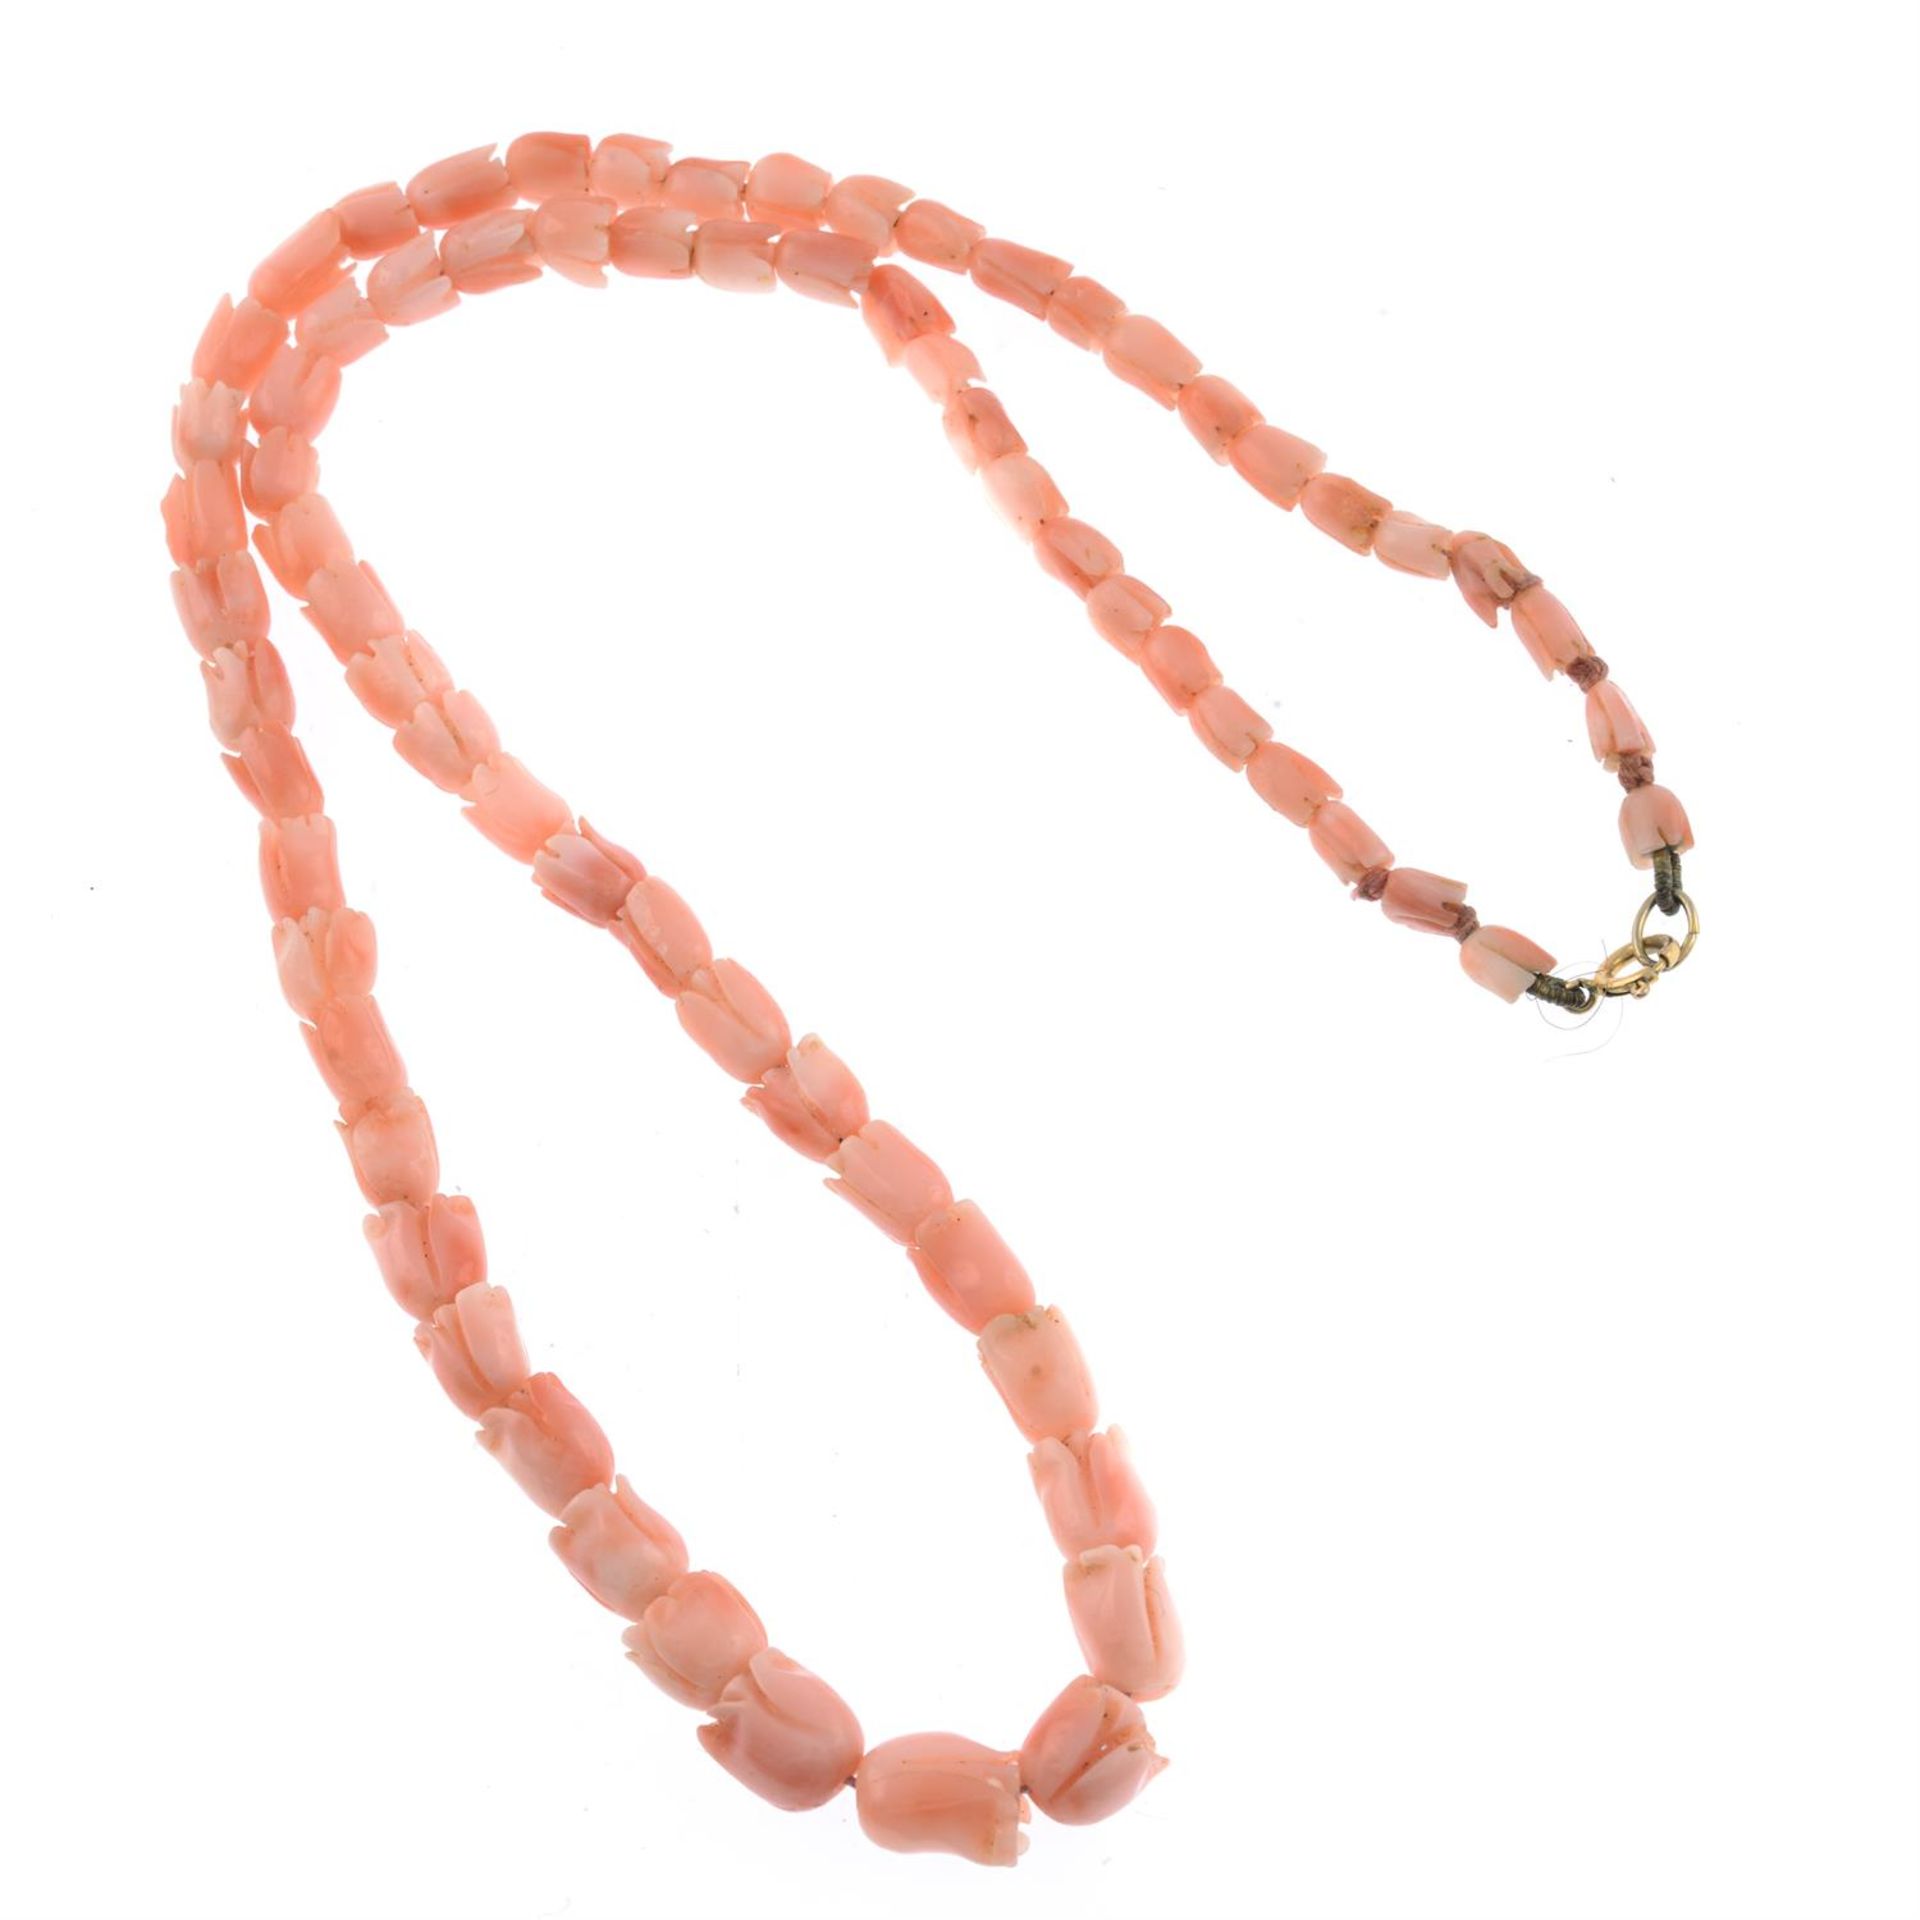 Early 20th century coral necklace - Image 2 of 2